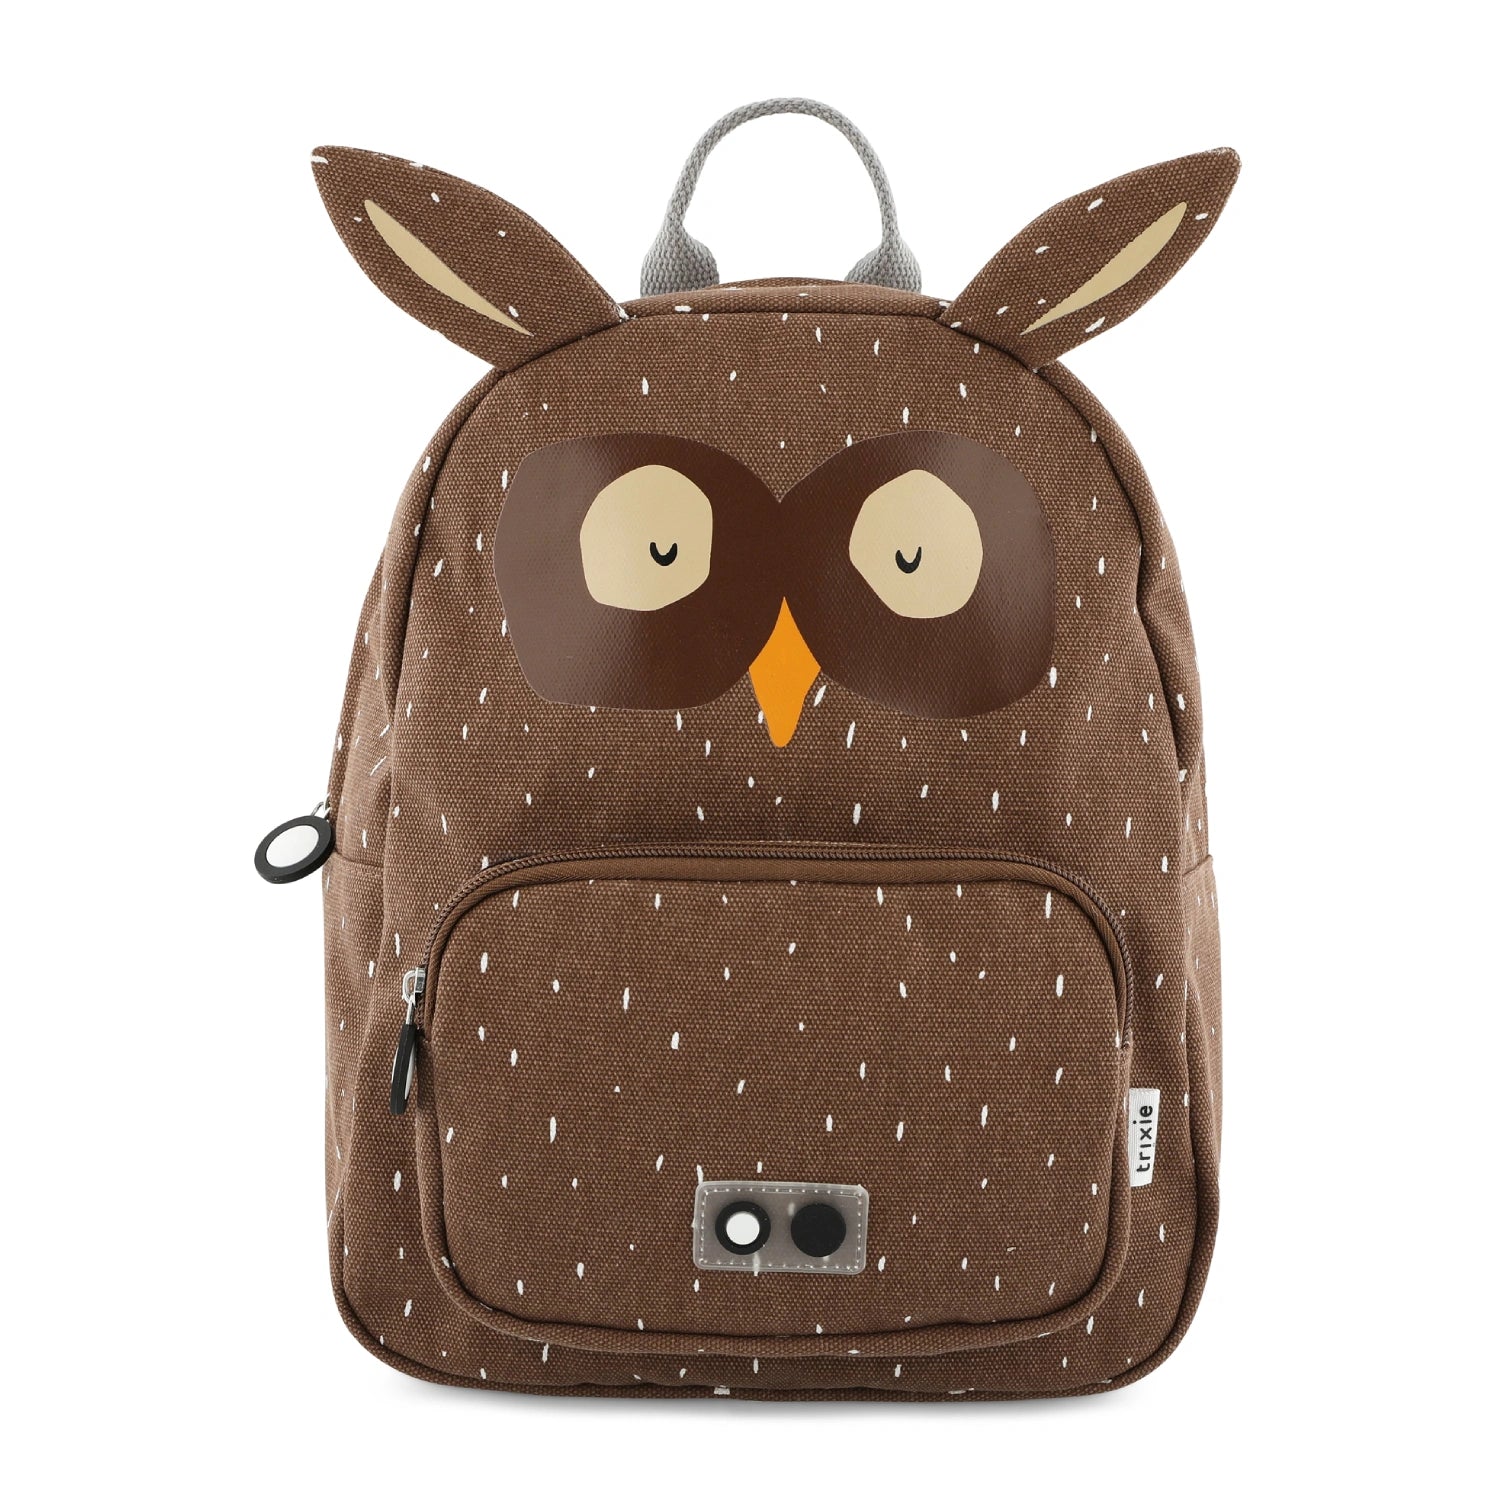 An image of Kids School Backpack - Trixie Bag Collection Mr. Owl